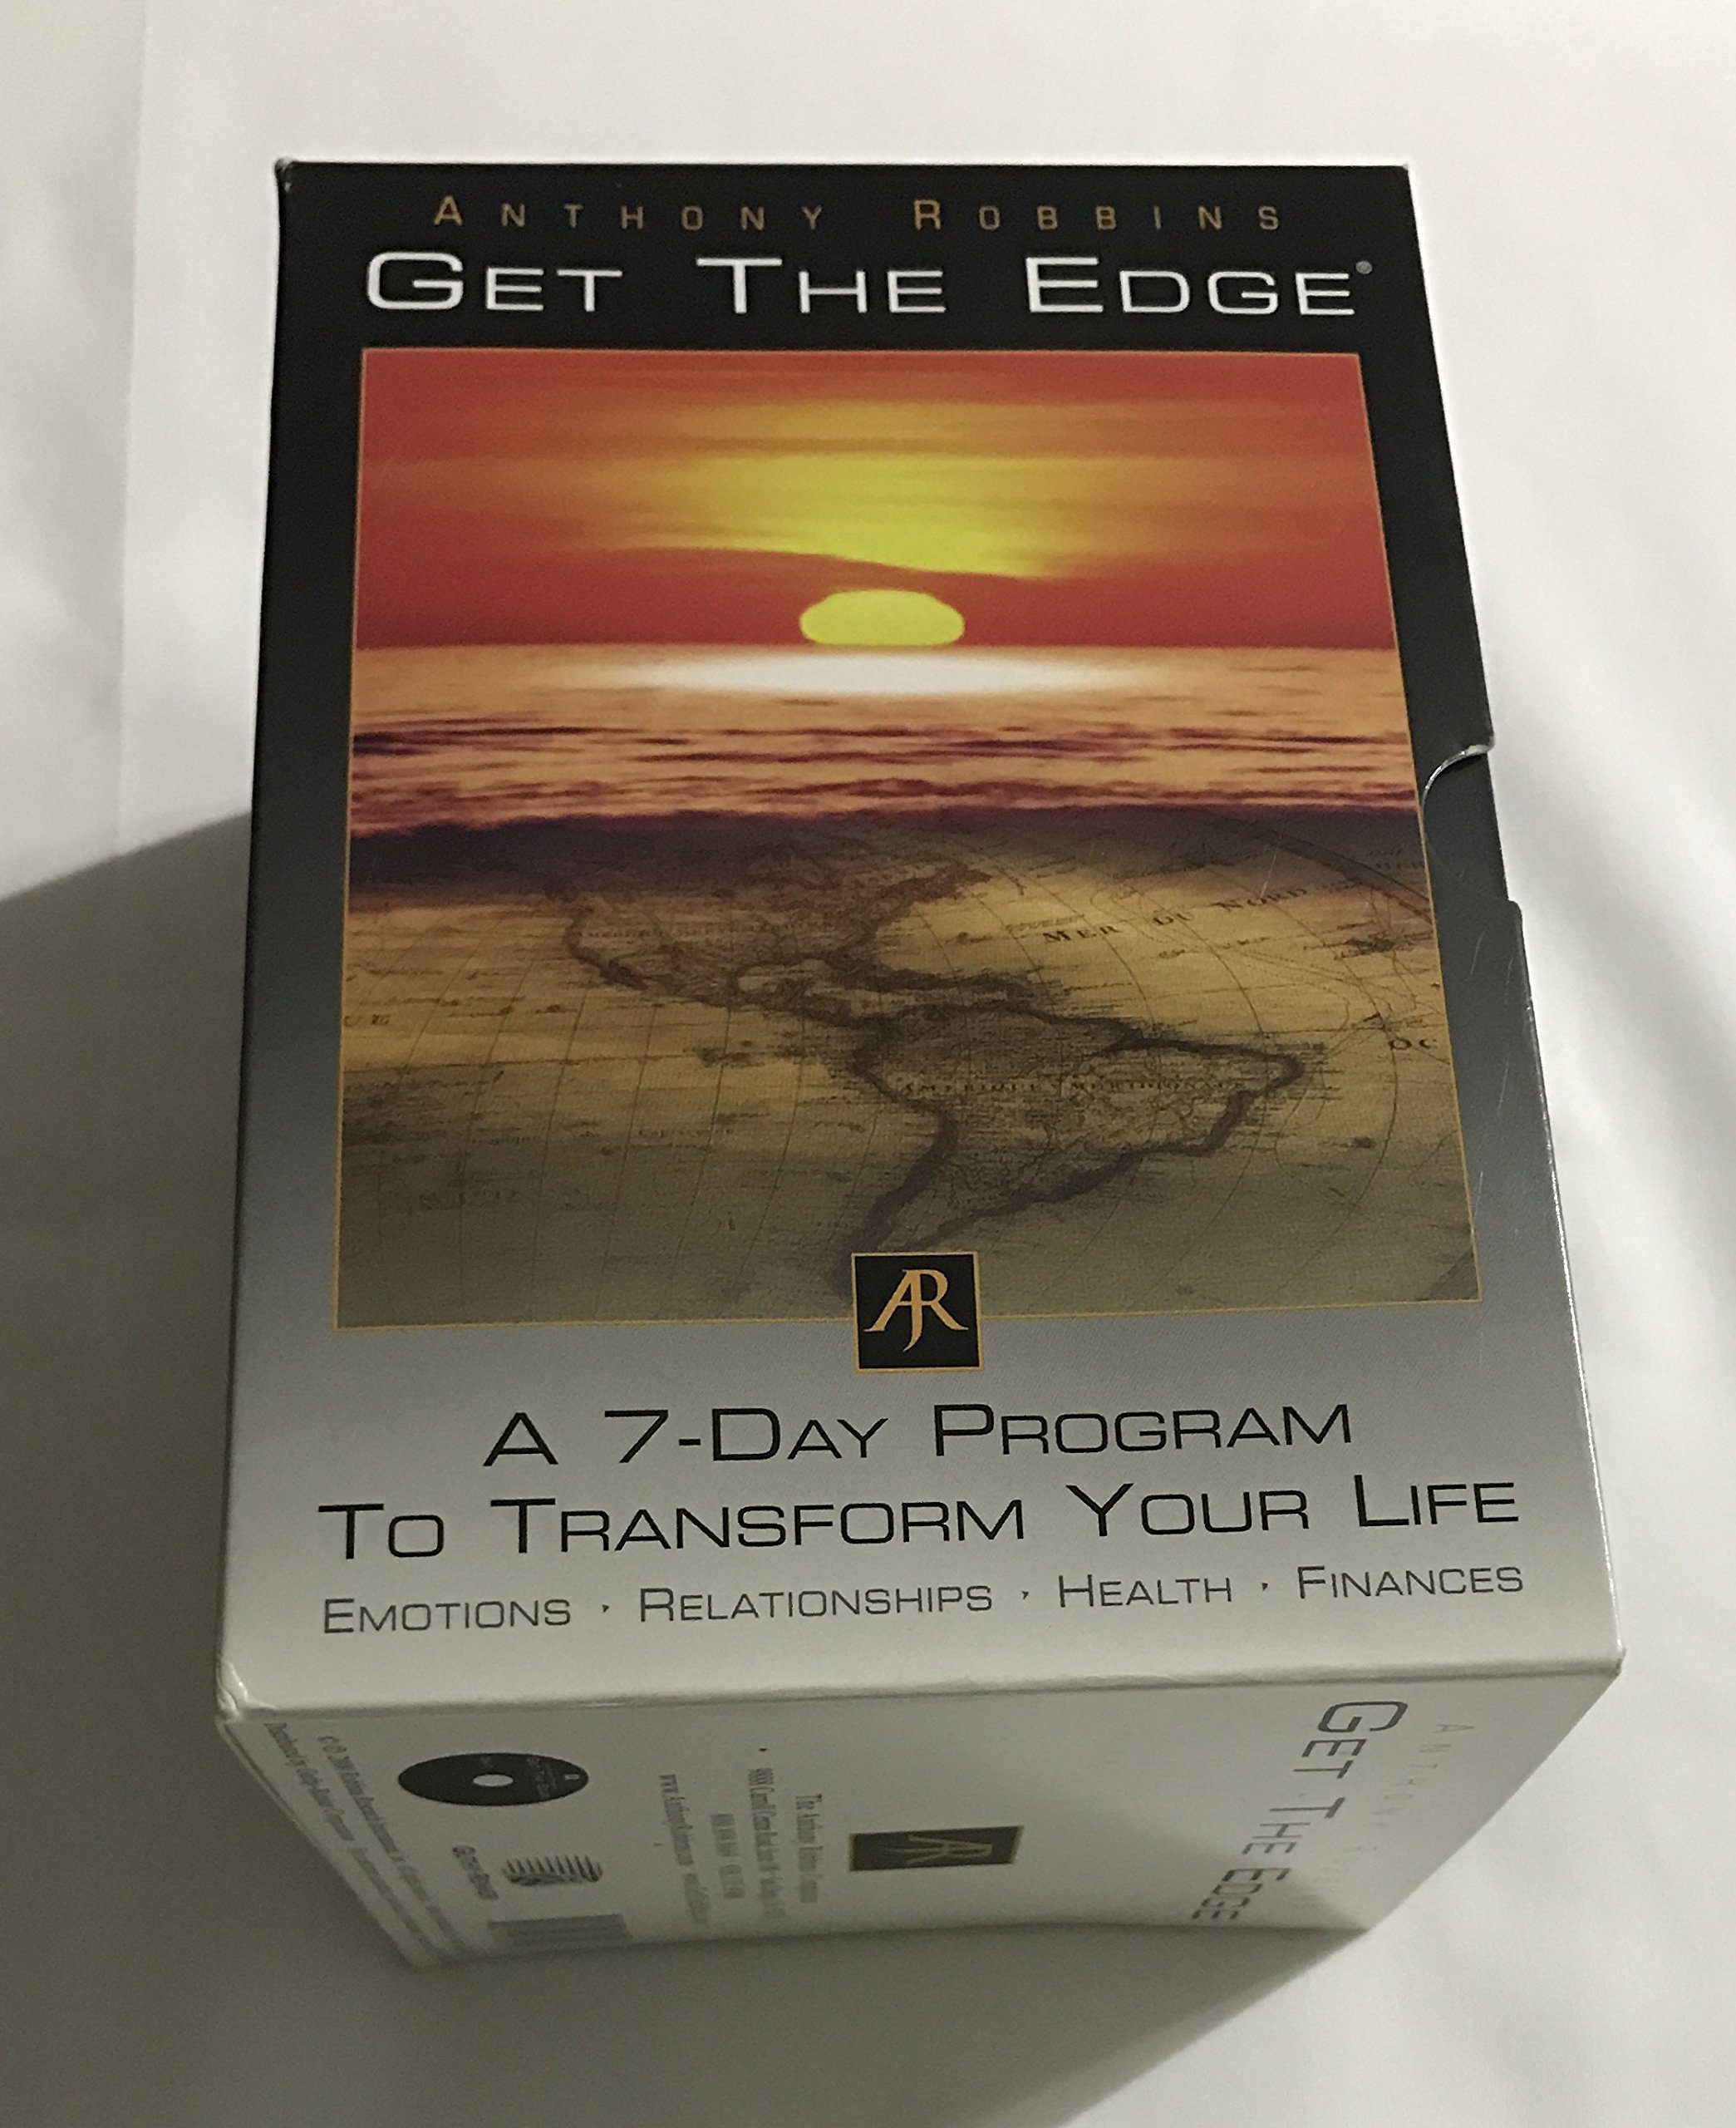 Get the Edge: A 7-Day Program To Transform Your Life Audio CD